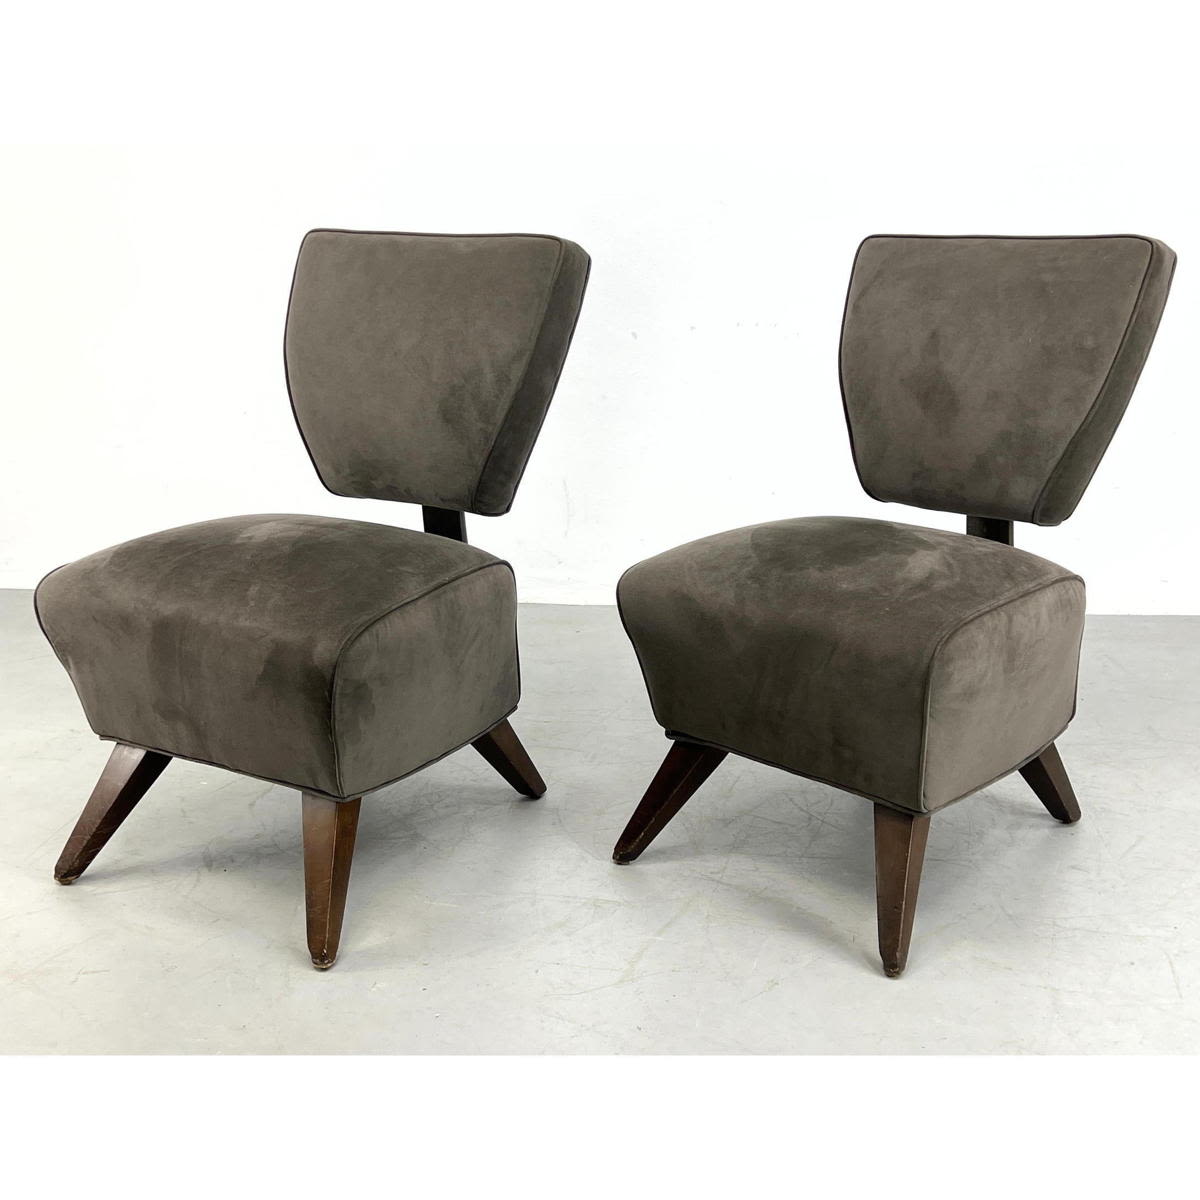 Pr deco style side chairs Wood